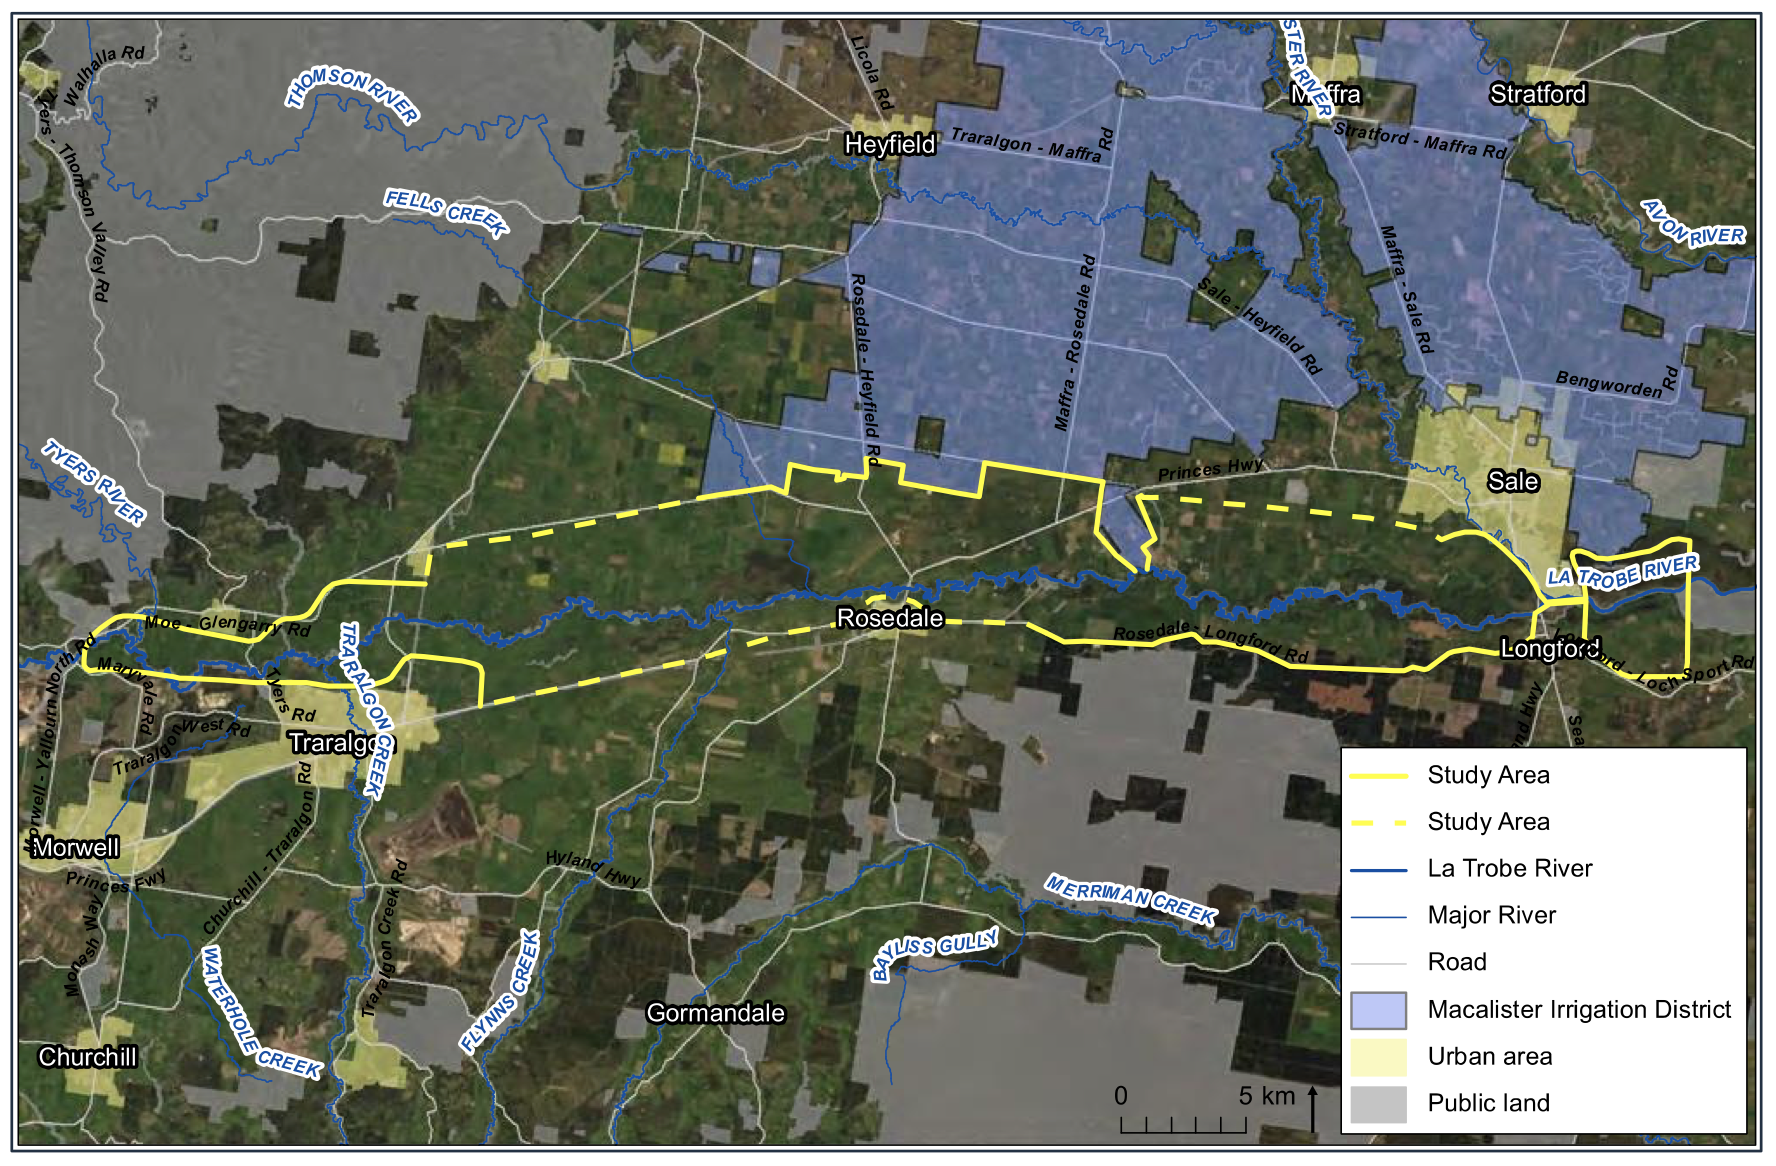 Map of the study area for irrigated agriculture for Phase 3 of the Southern Victoria Irrigation Development project